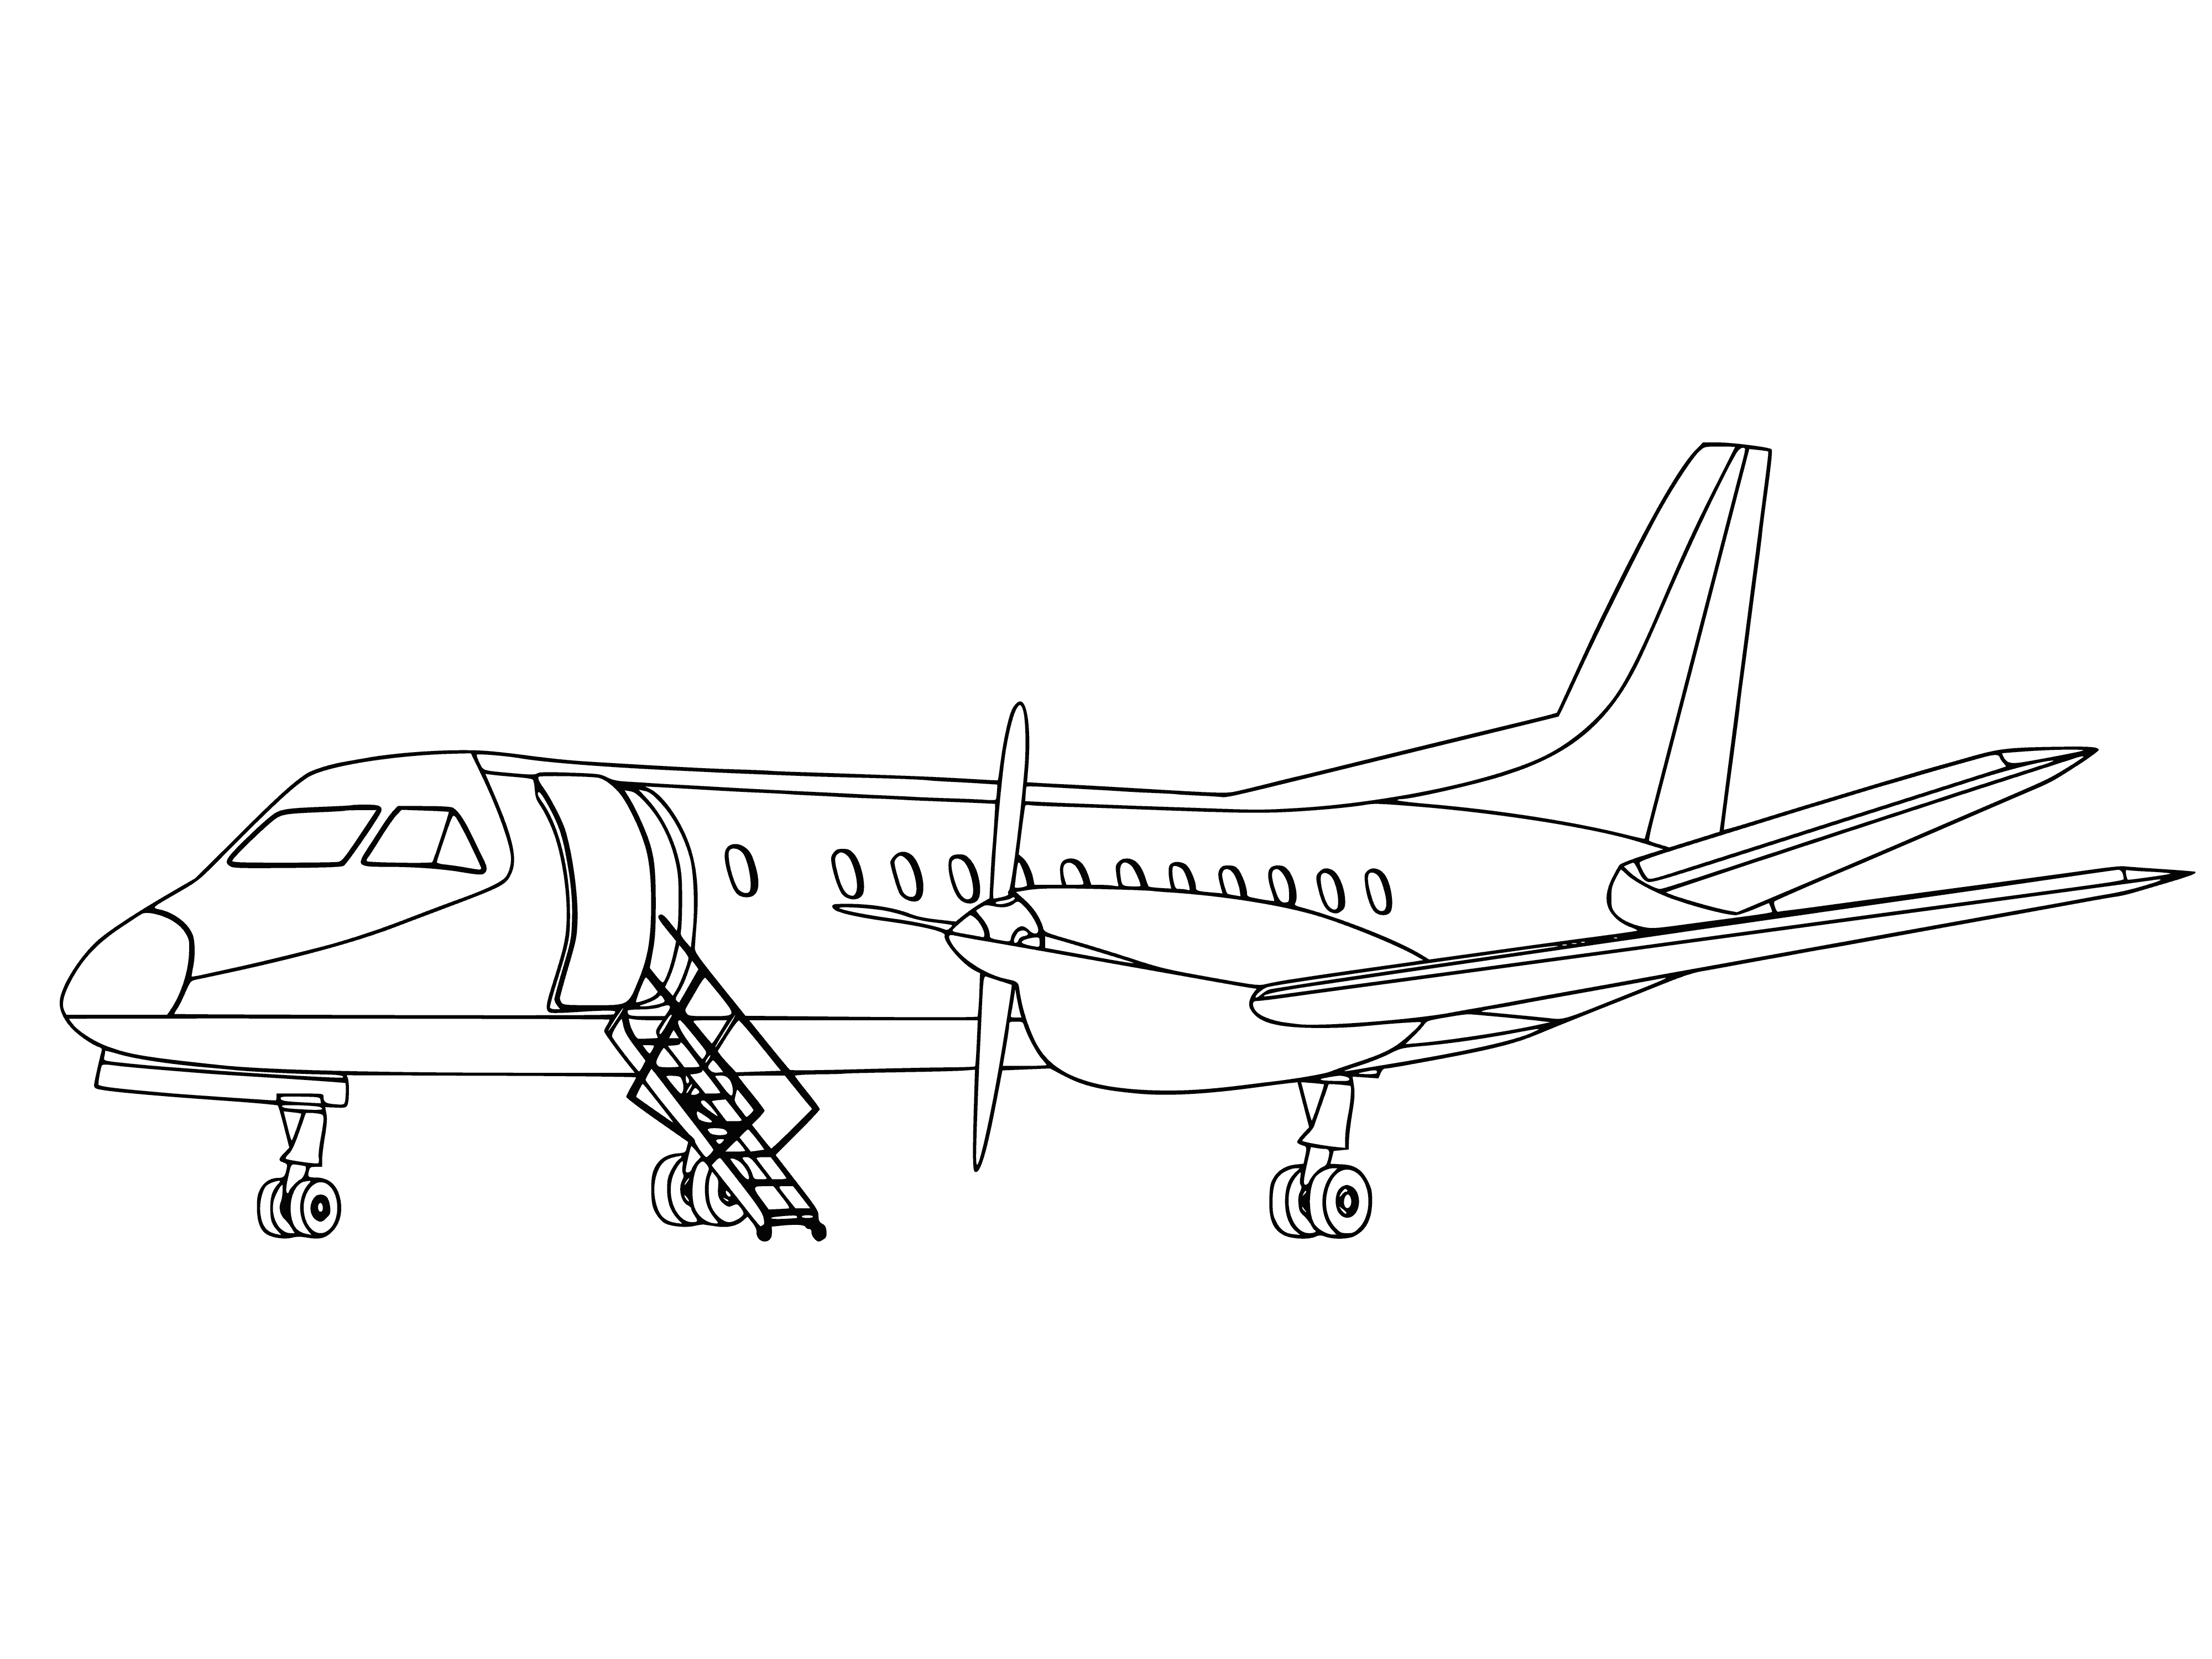 coloring page: A large metal tube-shaped vessel w/ metal wings, propellers, and windows mounted onto poles.